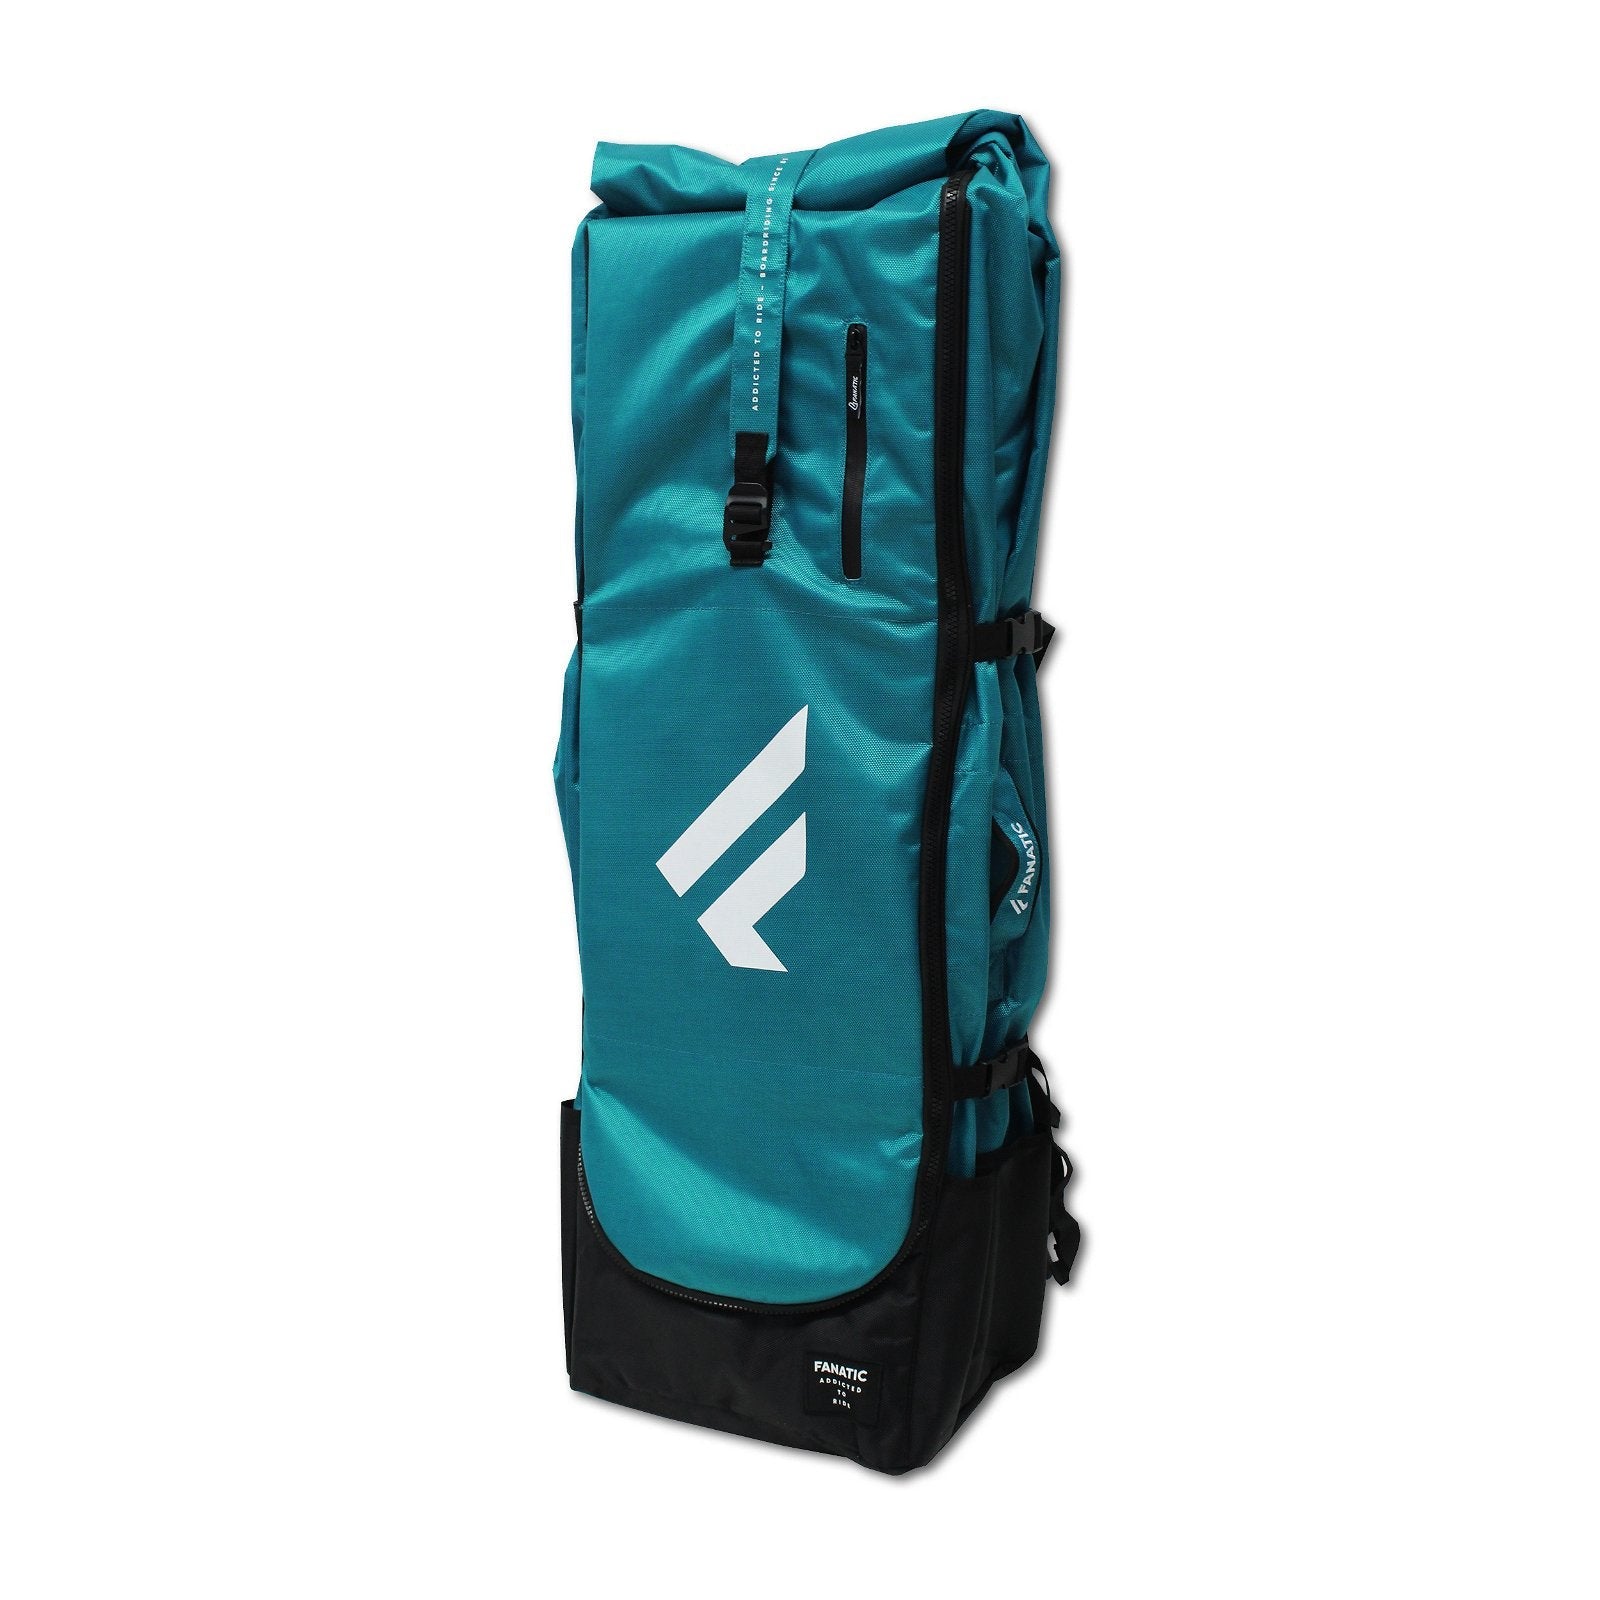 FANATIC Gearbag Pocket iSUP 2024-Fanatic SUP-S-turquoise-13200-7002-9008415928040-Surf-store.com